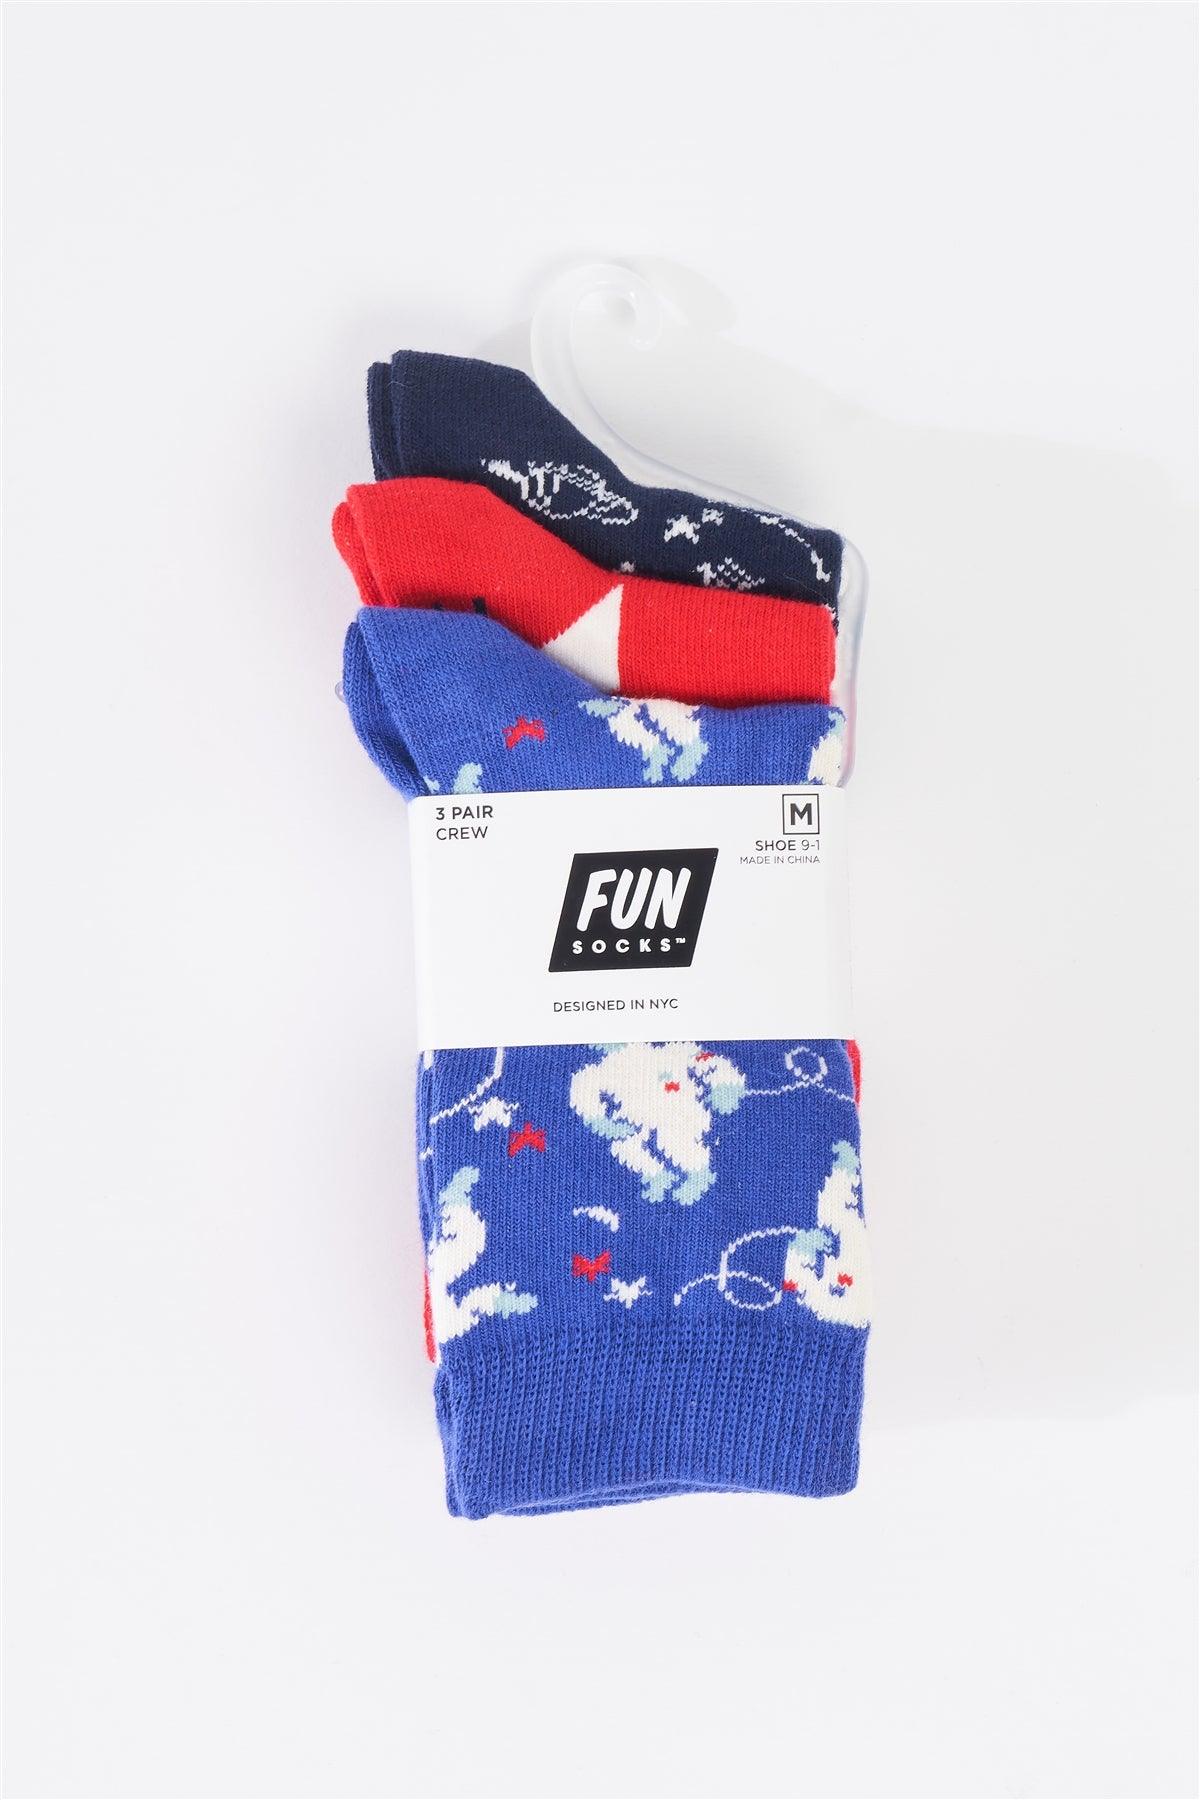 Fiorucci Fun Astro Themed Multicolor Printed Quarter Ankle Cut Kids' Socks Set Of Three /4 Sets Of 3 Pairs